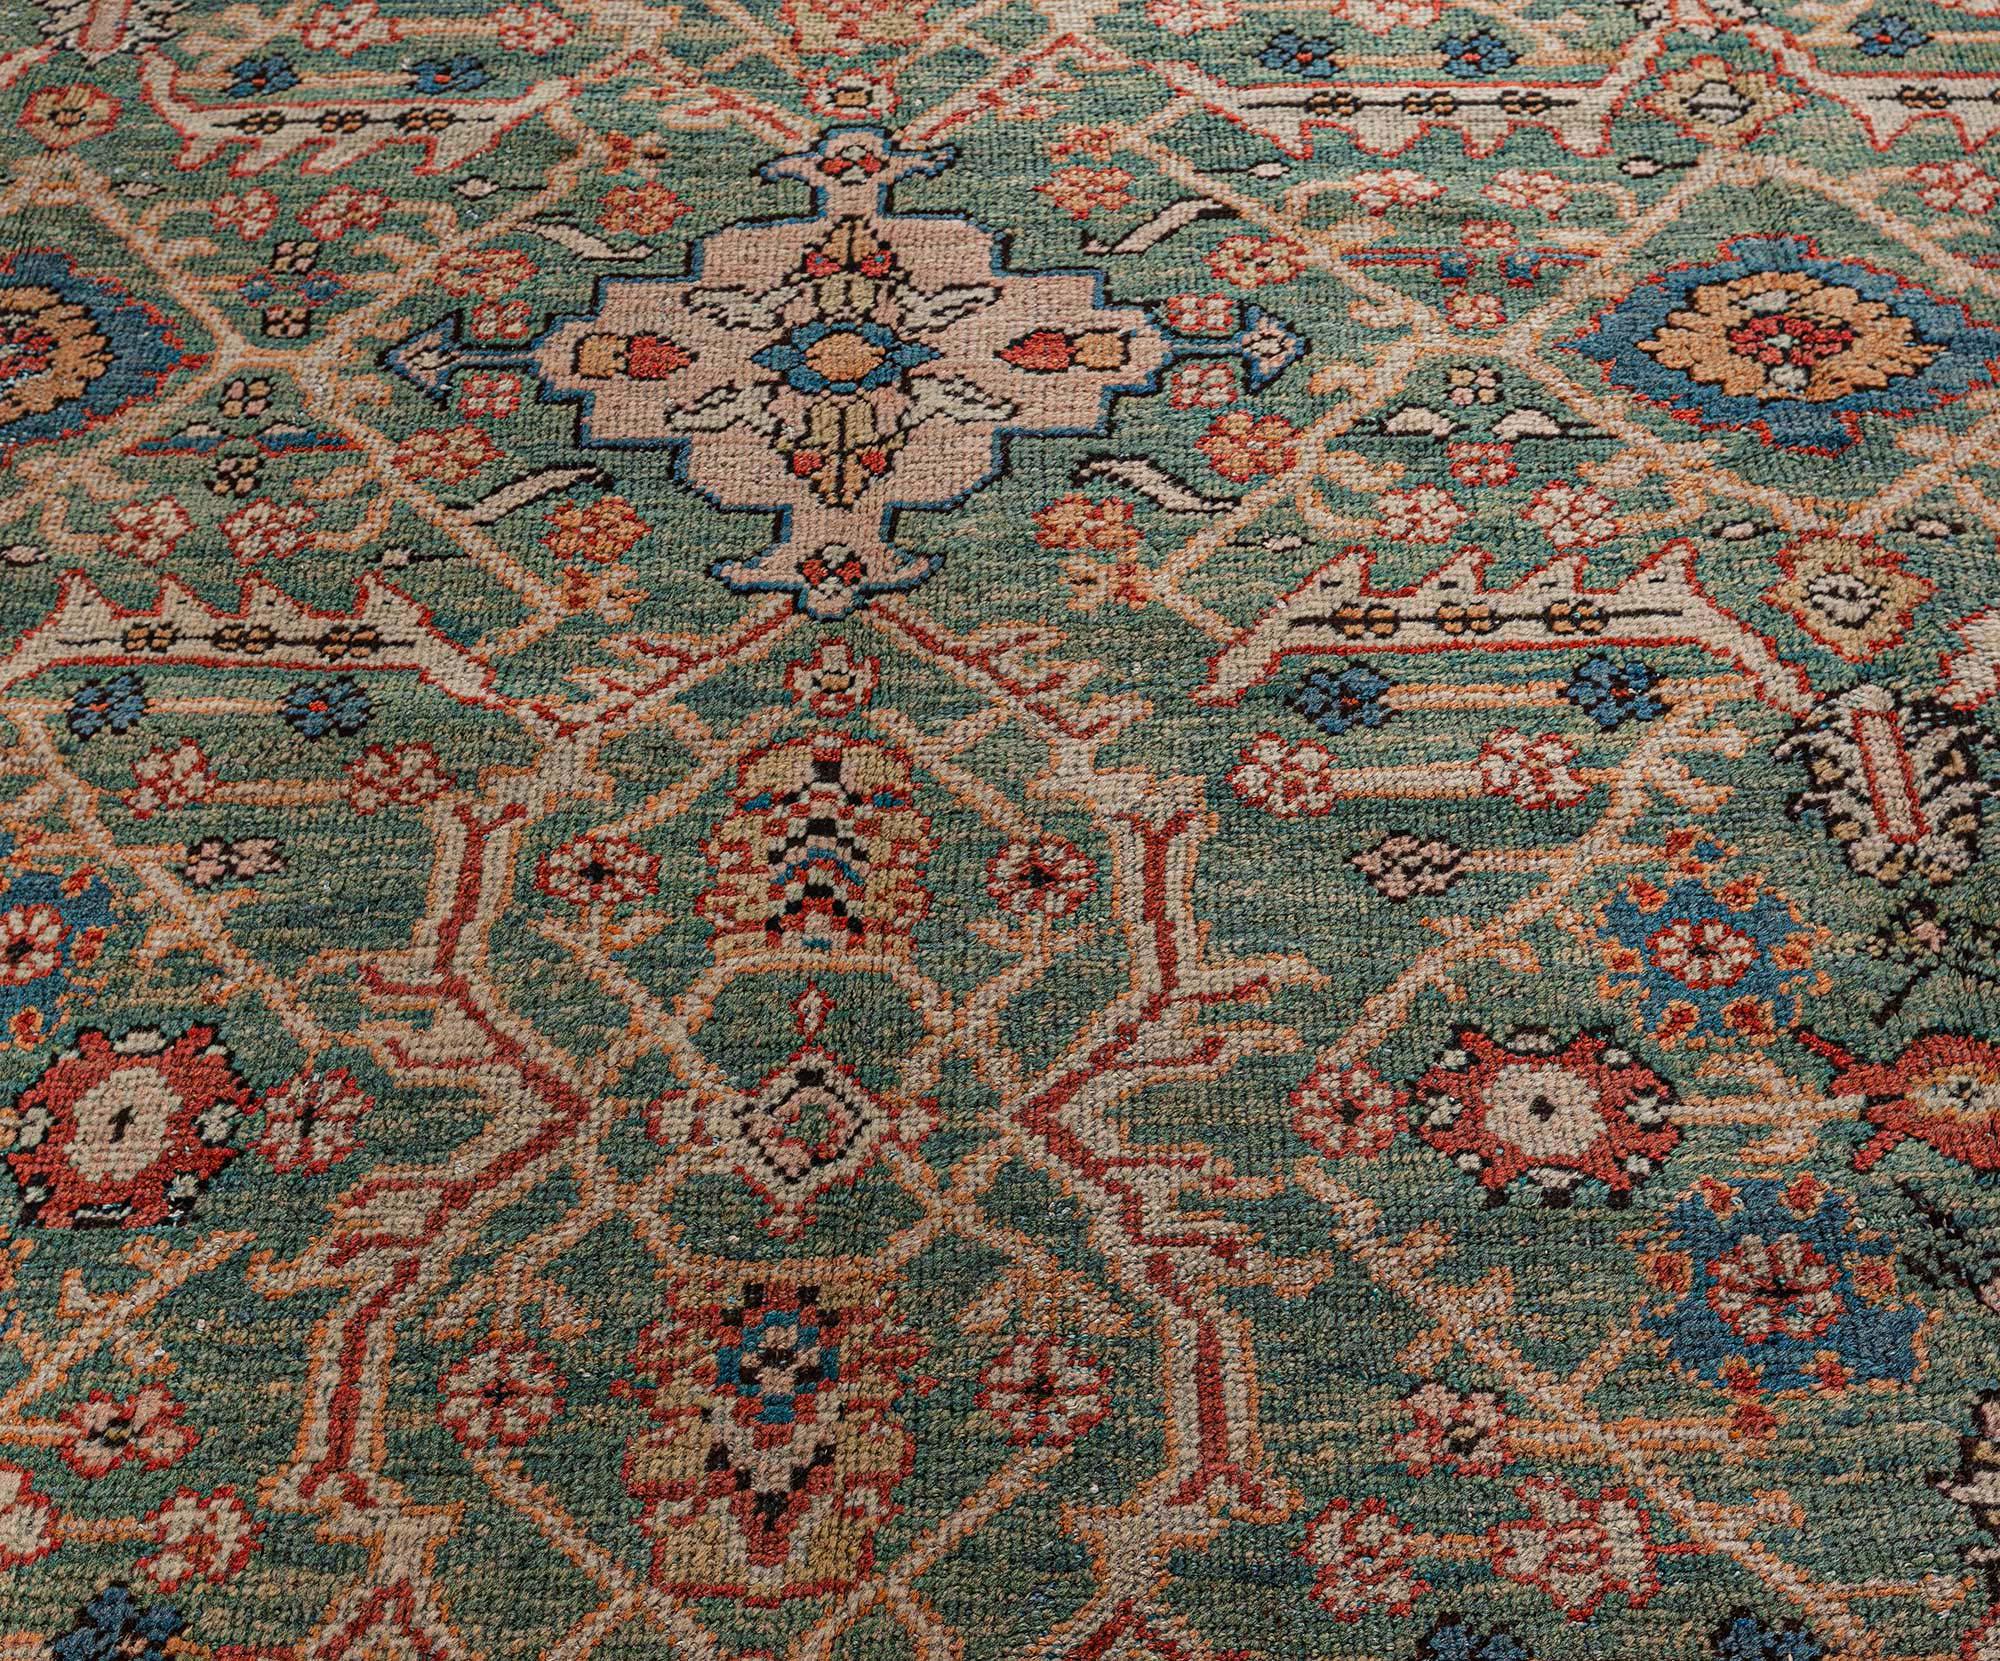 Antique Persian Sultanabad handmade wool rug
Size: 8'10